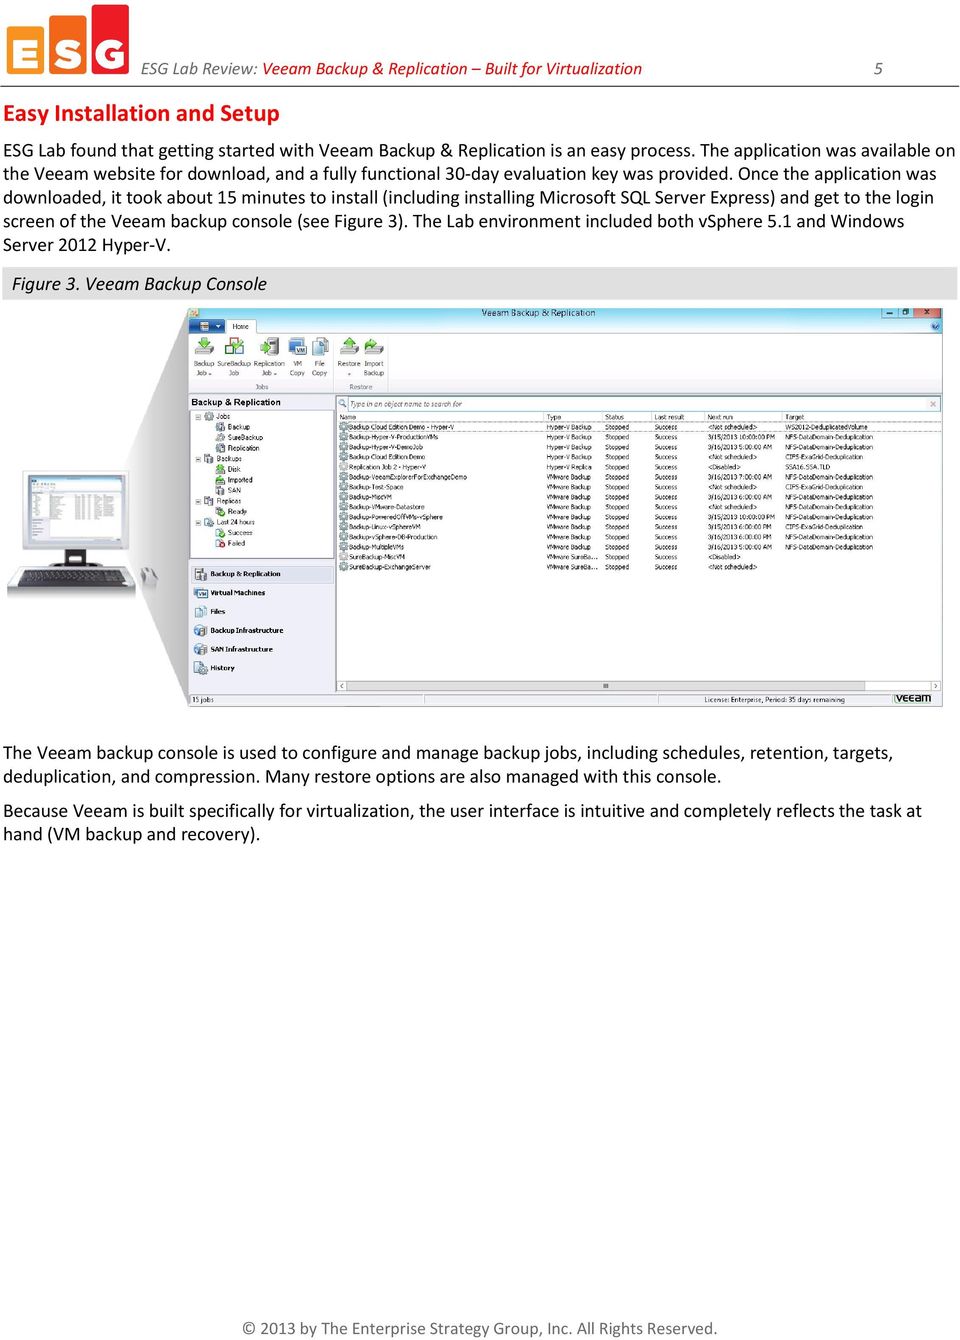 Once the application was downloaded, it took about 15 minutes to install (including installing Microsoft SQL Server Express) and get to the login screen of the Veeam backup console (see Figure 3).